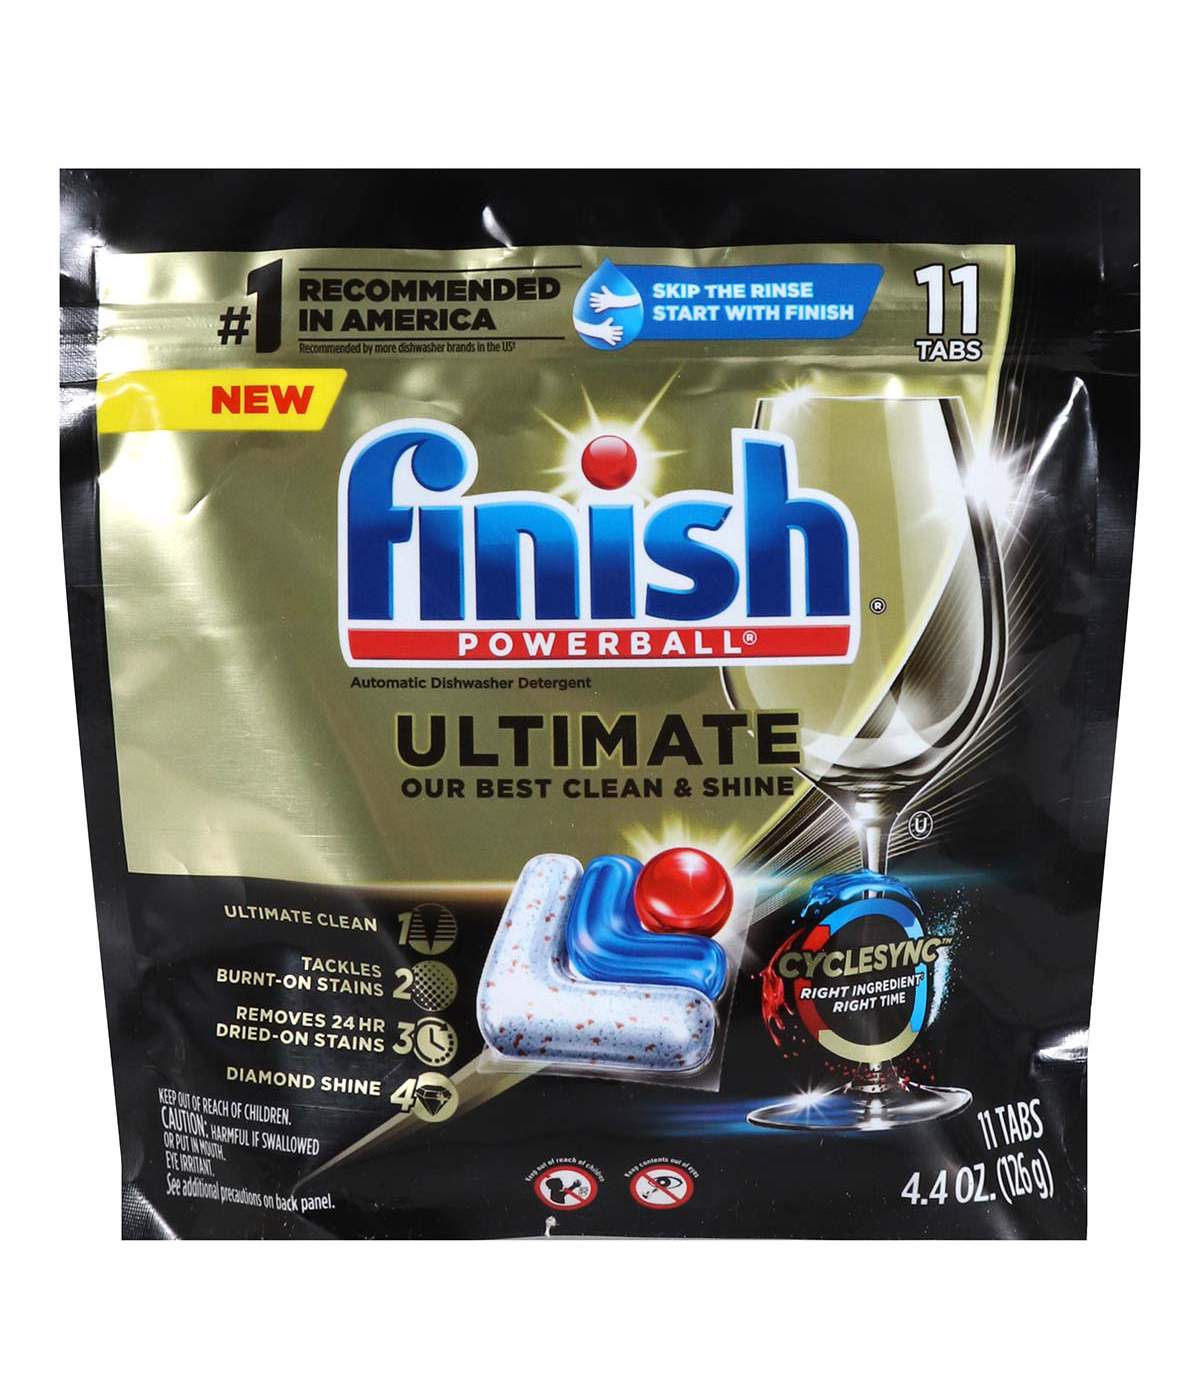 Finish Powerball Powerball Ultimate Dishwasher Detergent Tabs; image 1 of 2